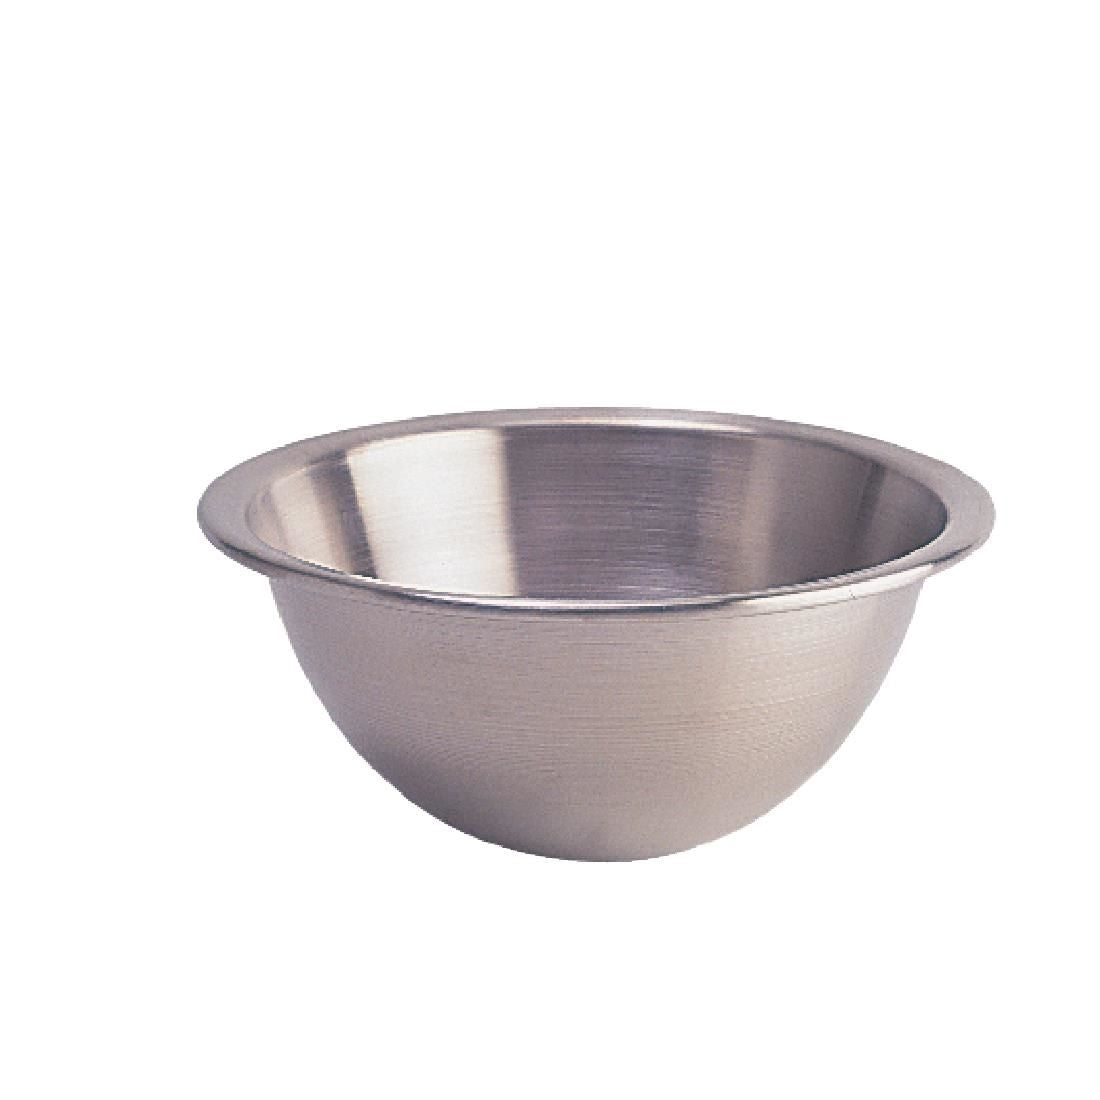 Bourgeat Round Bottom Whipping Bowl 3.5 Ltr - K556